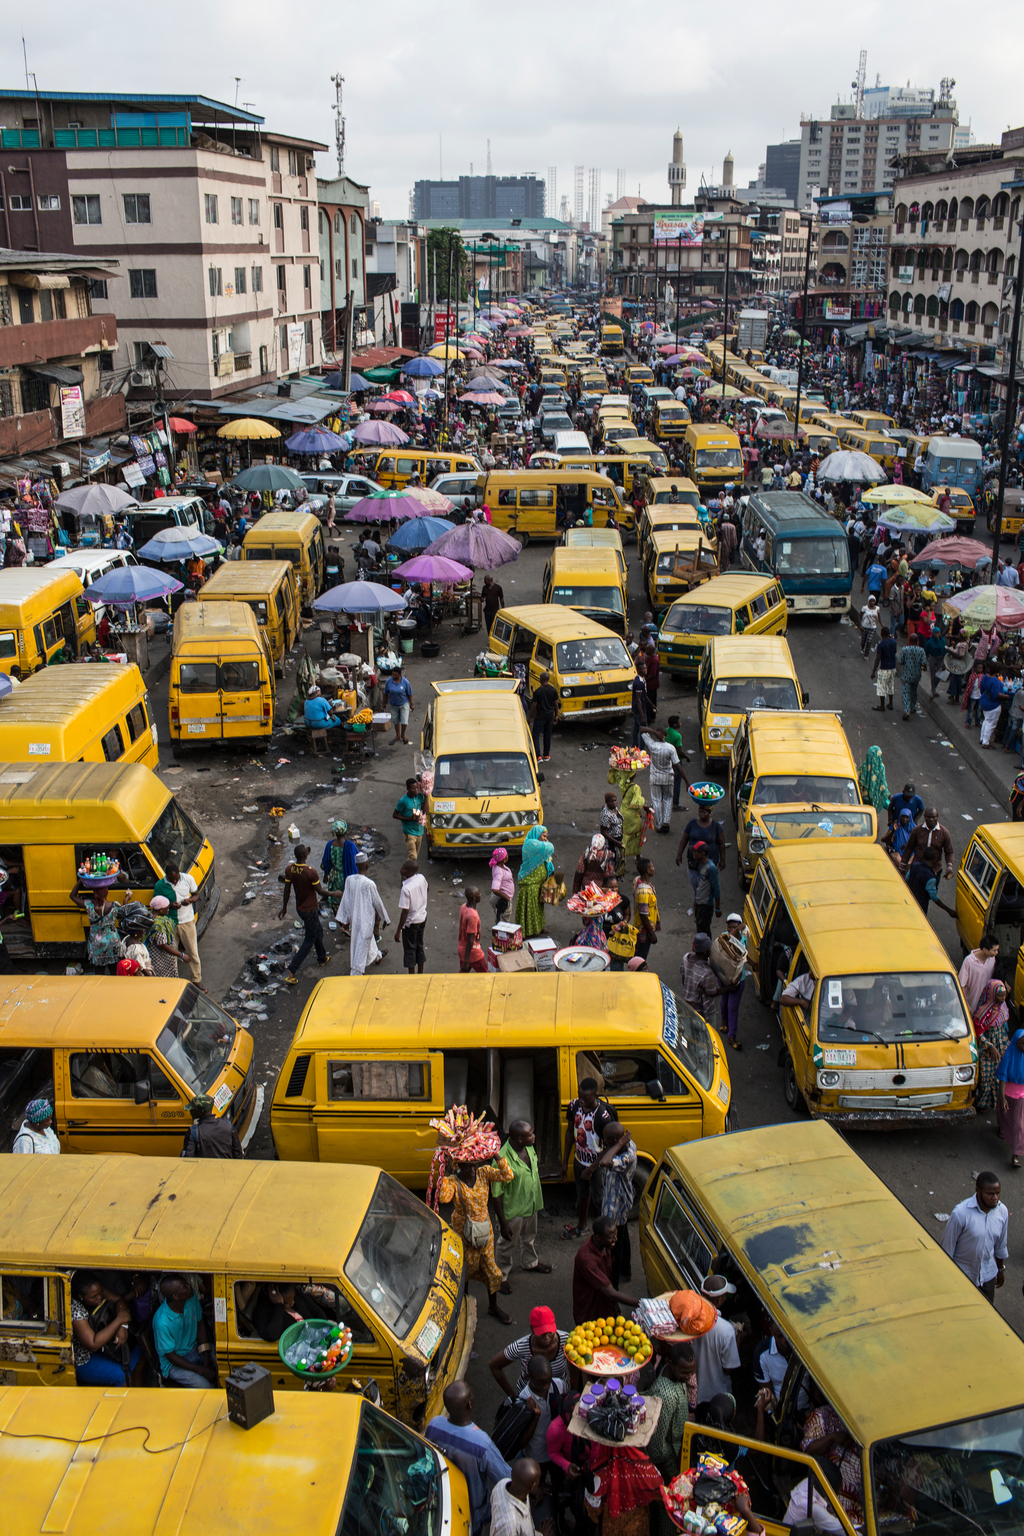 On 27 October 2016 in Lagos, Nigeria, street vendors sell their wares at Oshodi market as commuters make their way home, creating heavy traffic and fumes. Both vendors and commuters complain of headaches and trouble breathing as they inhale the toxic fumes from car exhaust as they are stuck in traffic or on the streets. Almost one in seven of the worlds children, 300 million, live in areas with toxic levels of outdoor air pollution - six times higher than international guidelines according to a report from UNICEF, Clear the Air for Children, released ahead of COP 22. UNICEFs findings, the first of its kind and based on satellite imagery, also show that around 2 billion children in total live in areas where outdoor air pollution exceeds limits set by the World Health Organization as being safe for human health. This air pollution is caused by factors such as vehicle and factory emissions, heavy use of fossil fuels, dust and burning of waste. Indoor pollution is commonly caused by use of fuels like coal and wood for cooking and heating. Taken together, outdoor and indoor air pollution are one of the leading dangers facing children -- they are a contributing factor in the deaths of almost 600,000 children under five every year. This figure represents nearly 1 in 10 under-five deaths. Air pollution is also linked with poor health and diseases among millions more children that can severely affect their overall wellbeing and development. It causes difficulty breathing; studies show it is linked with, and can exacerbate asthma, bronchitis, and the inflammation of airways, as well as other underlying health issues. Children who breathe polluted air are at higher risk of potentially severe health problems-- in particular, acute respiratory infections such as pneumonia. Children are more susceptible to the harmful effects of both indoor and outdoor air pollution as their lungs, brains and immune systems are still developing and their respiratory tracks are more